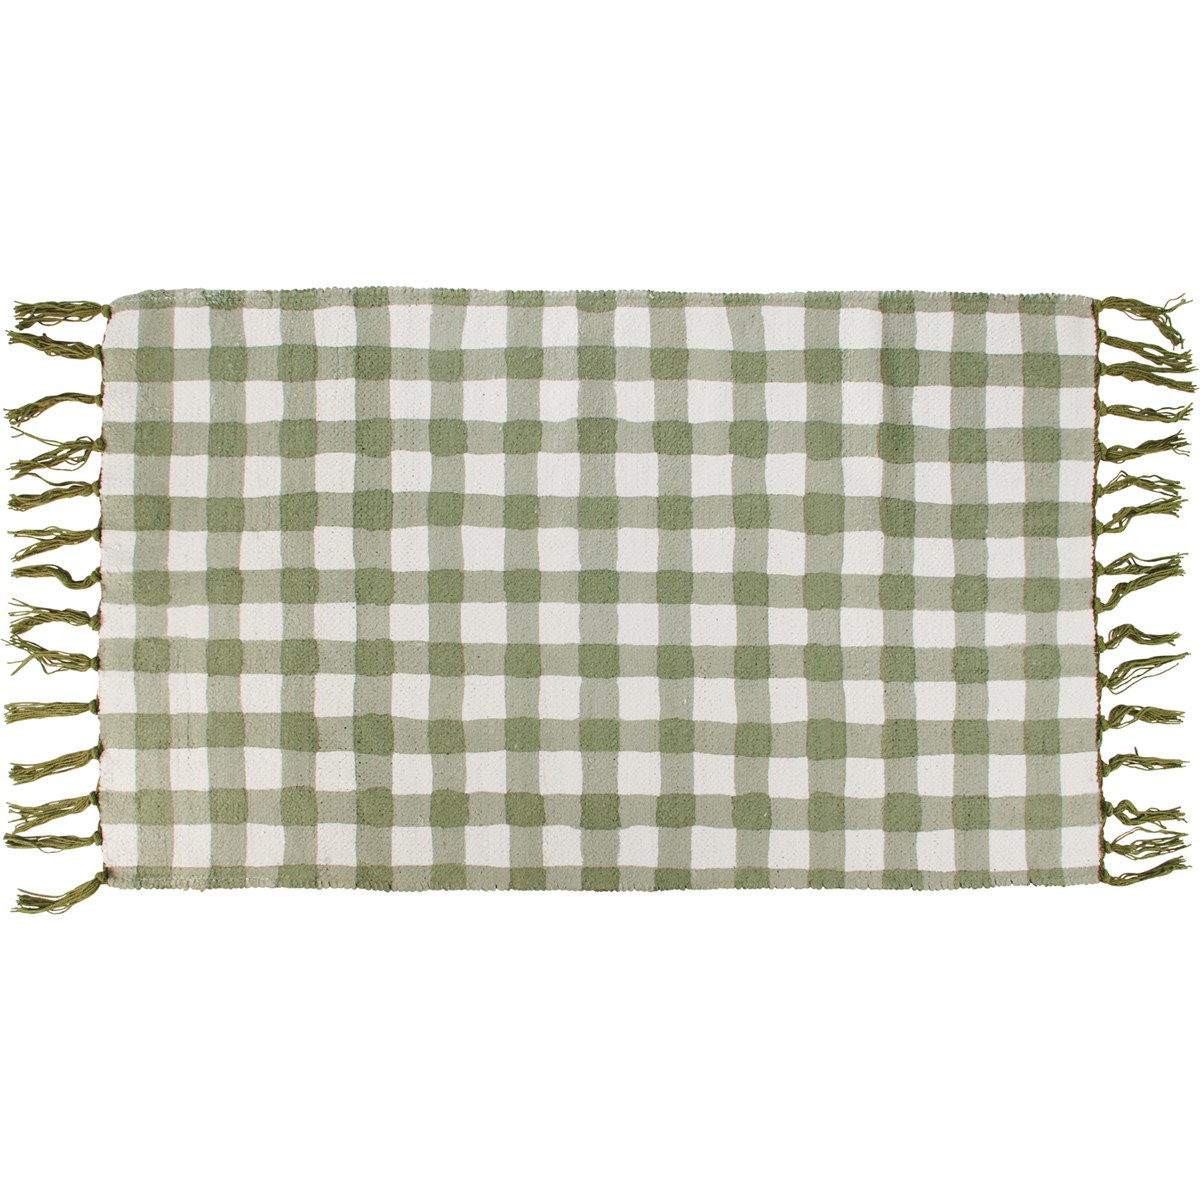 Green Gingham Rug - Cotton, Chenille, Latex skid-resistant backing